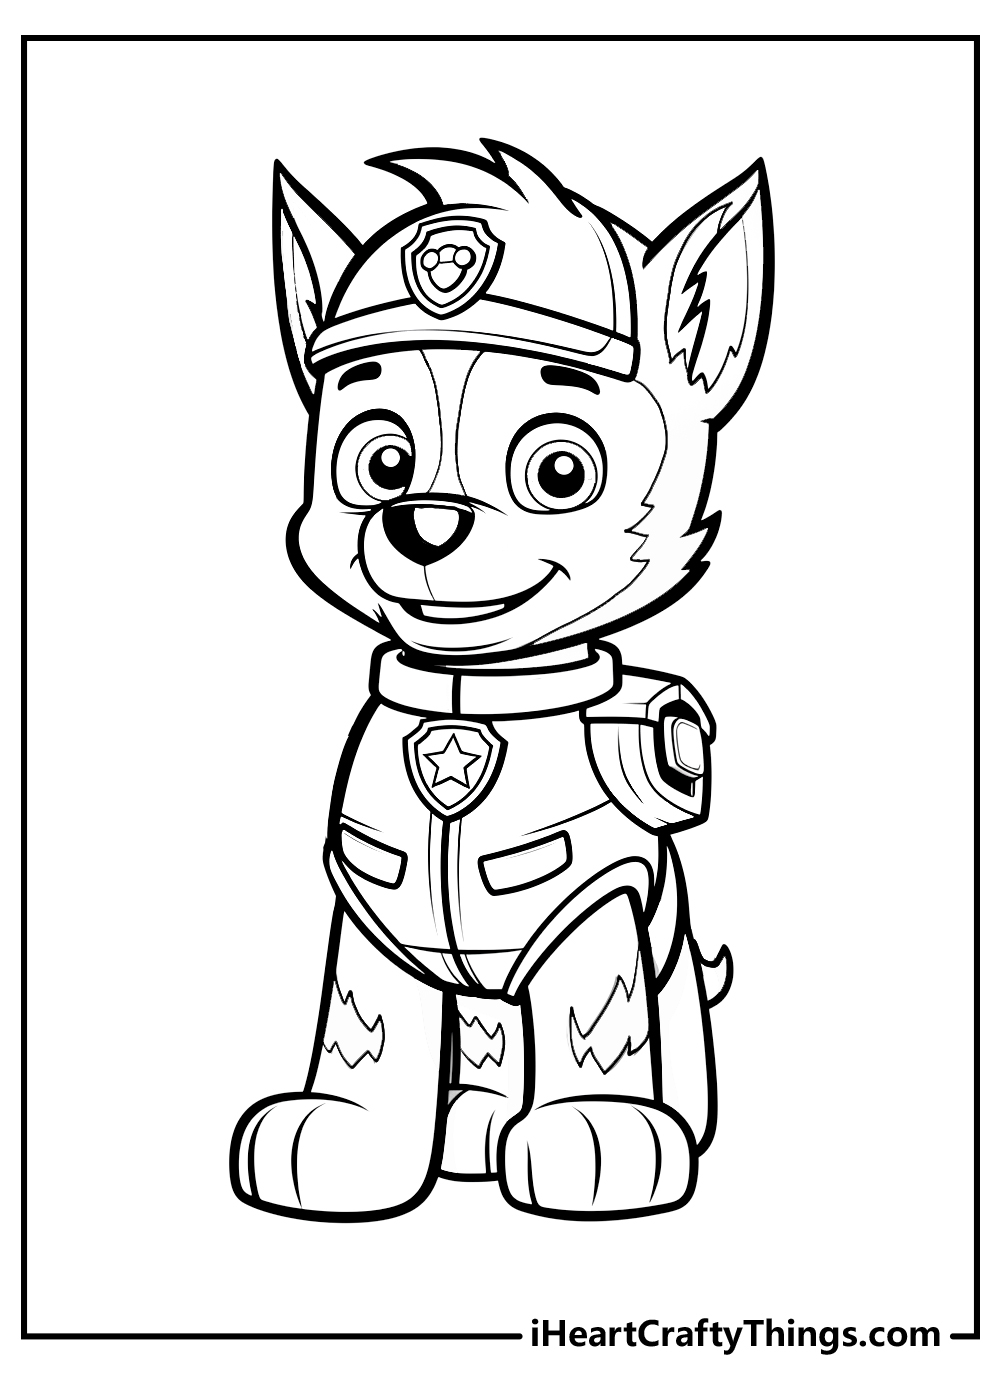 Paw Patrol Coloring Pages 